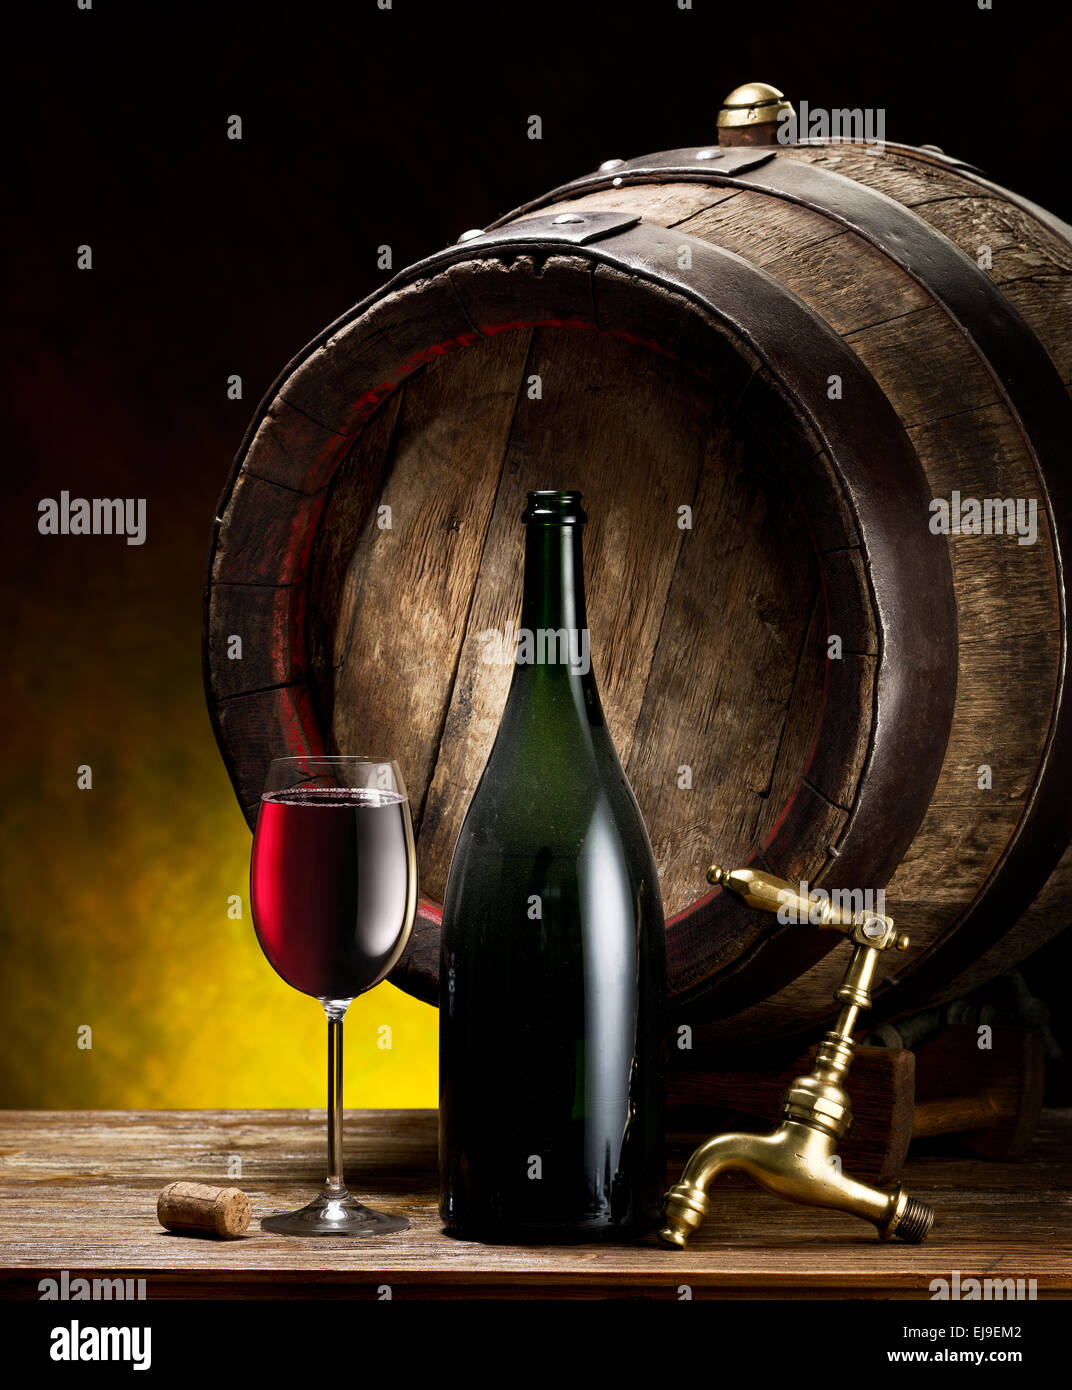 Still-life with glass of wine, bottle and barrel on the table in the cellar. Stock Photo